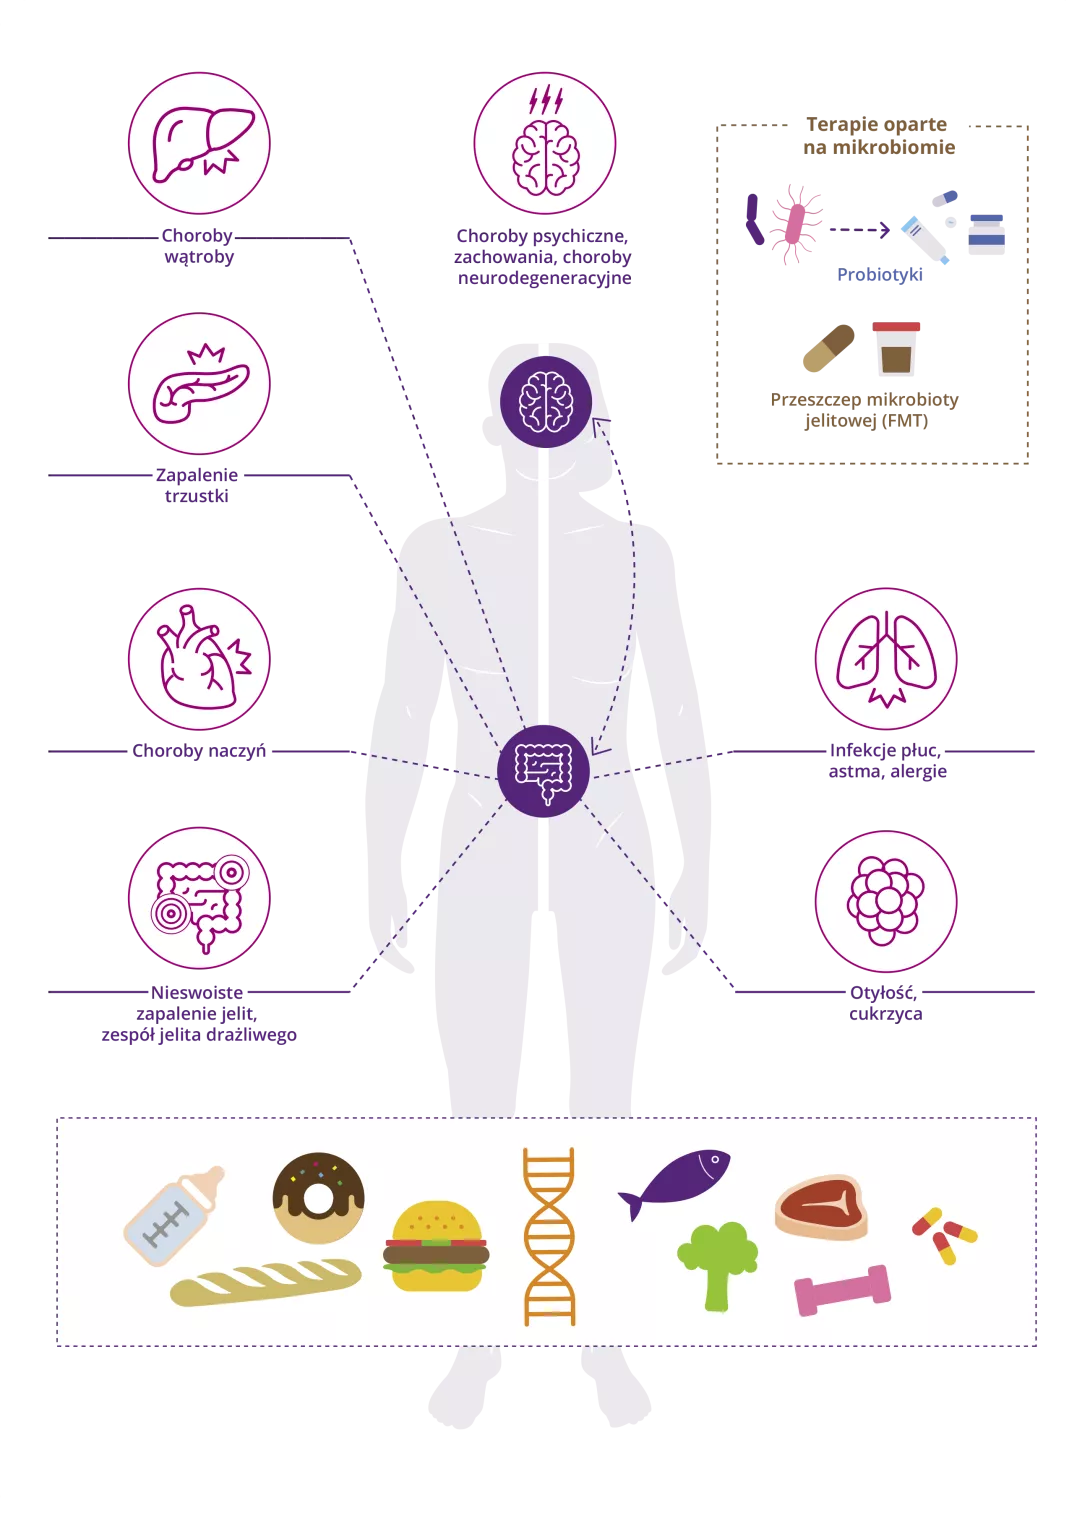 [infographic] The role of the gut microbiota in human health (PL)